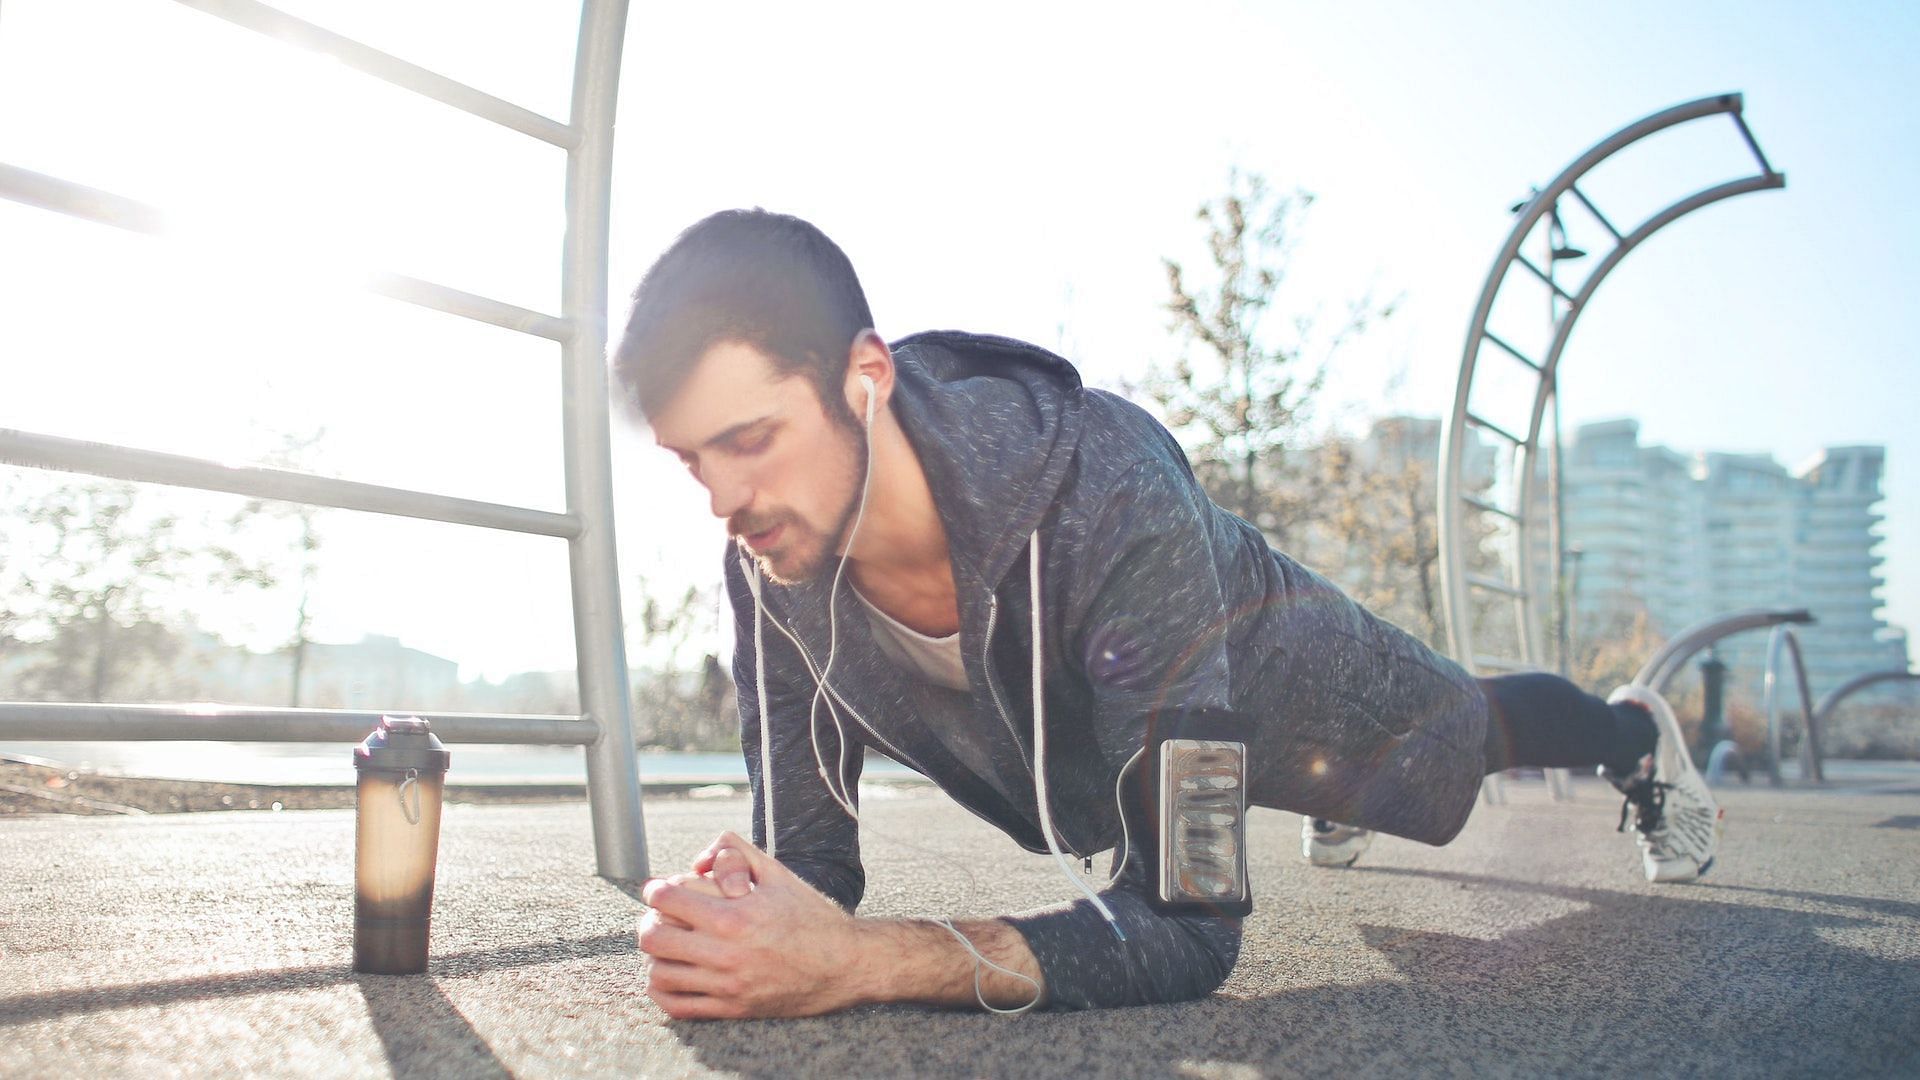 These exercises can be done anywhere. Image via Pexels/Andrea Piacquadio